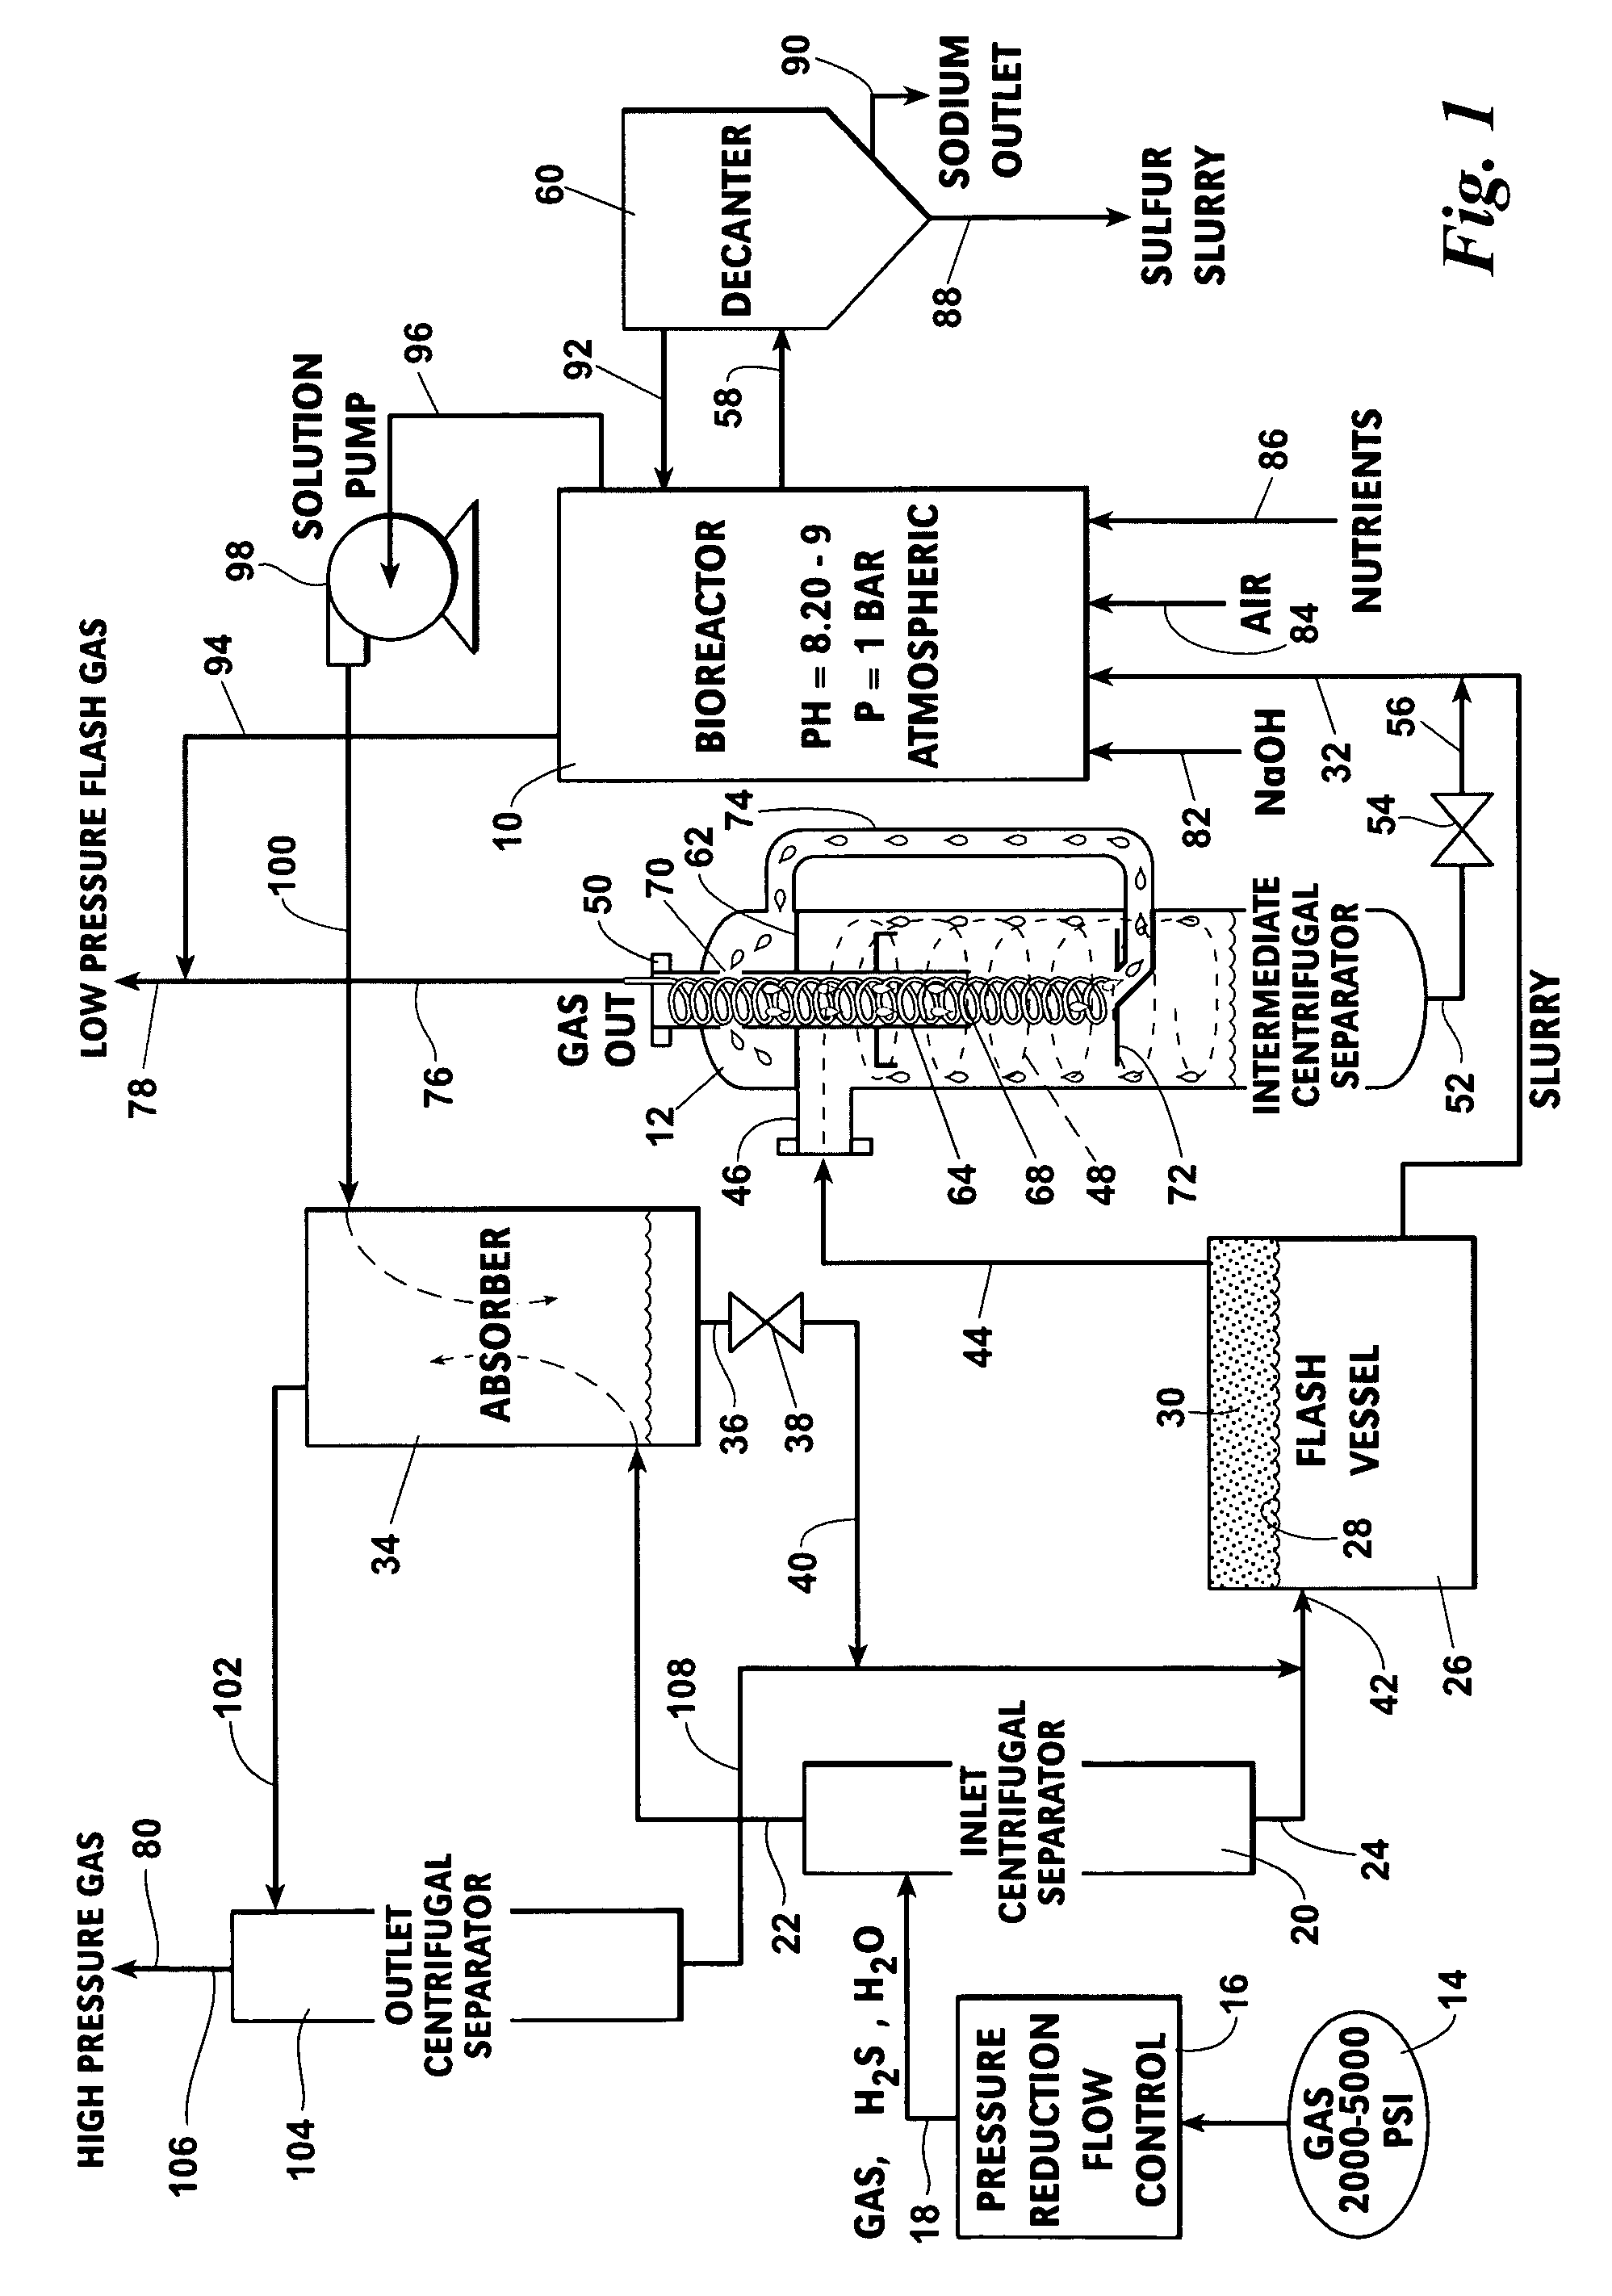 Method for extracting H2S from sour gas